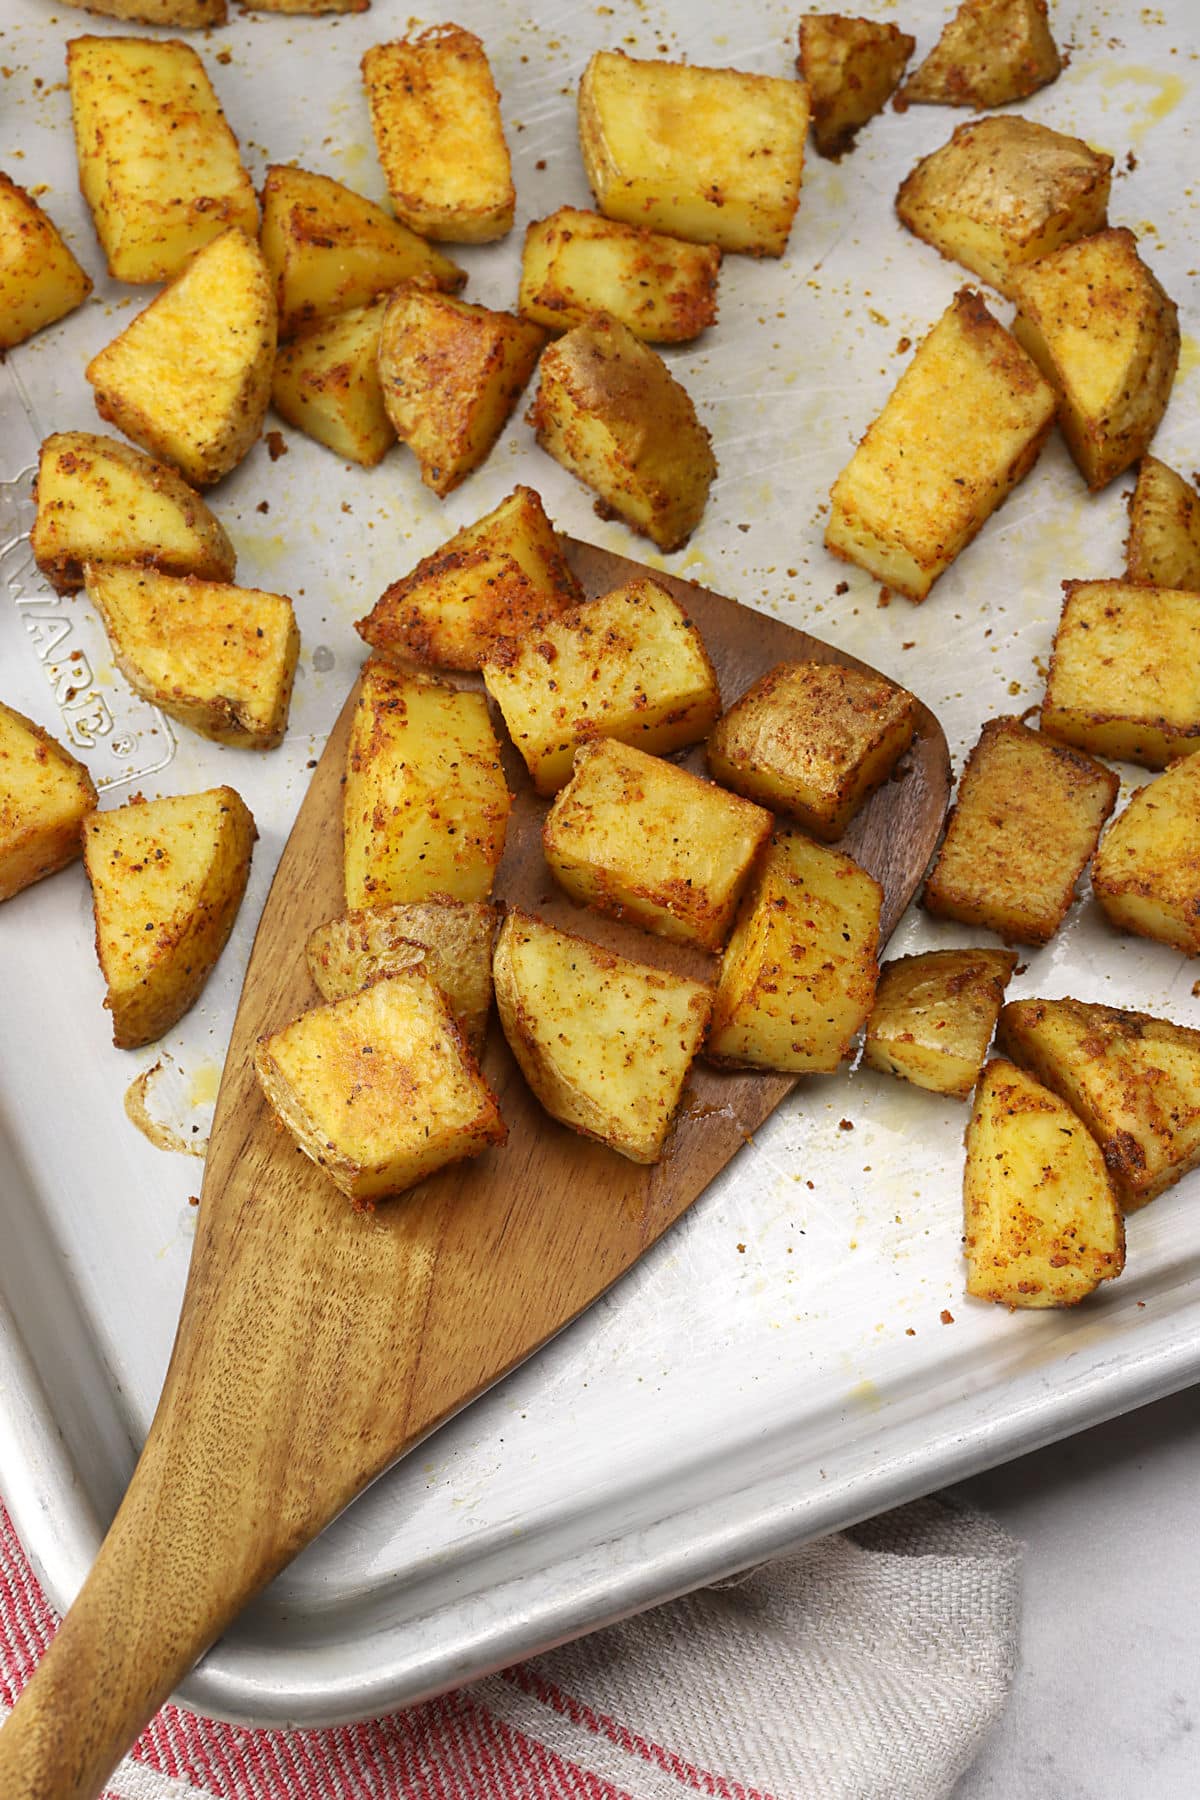 A wooden spatula scooping roasted potatoes from a sheet pan.